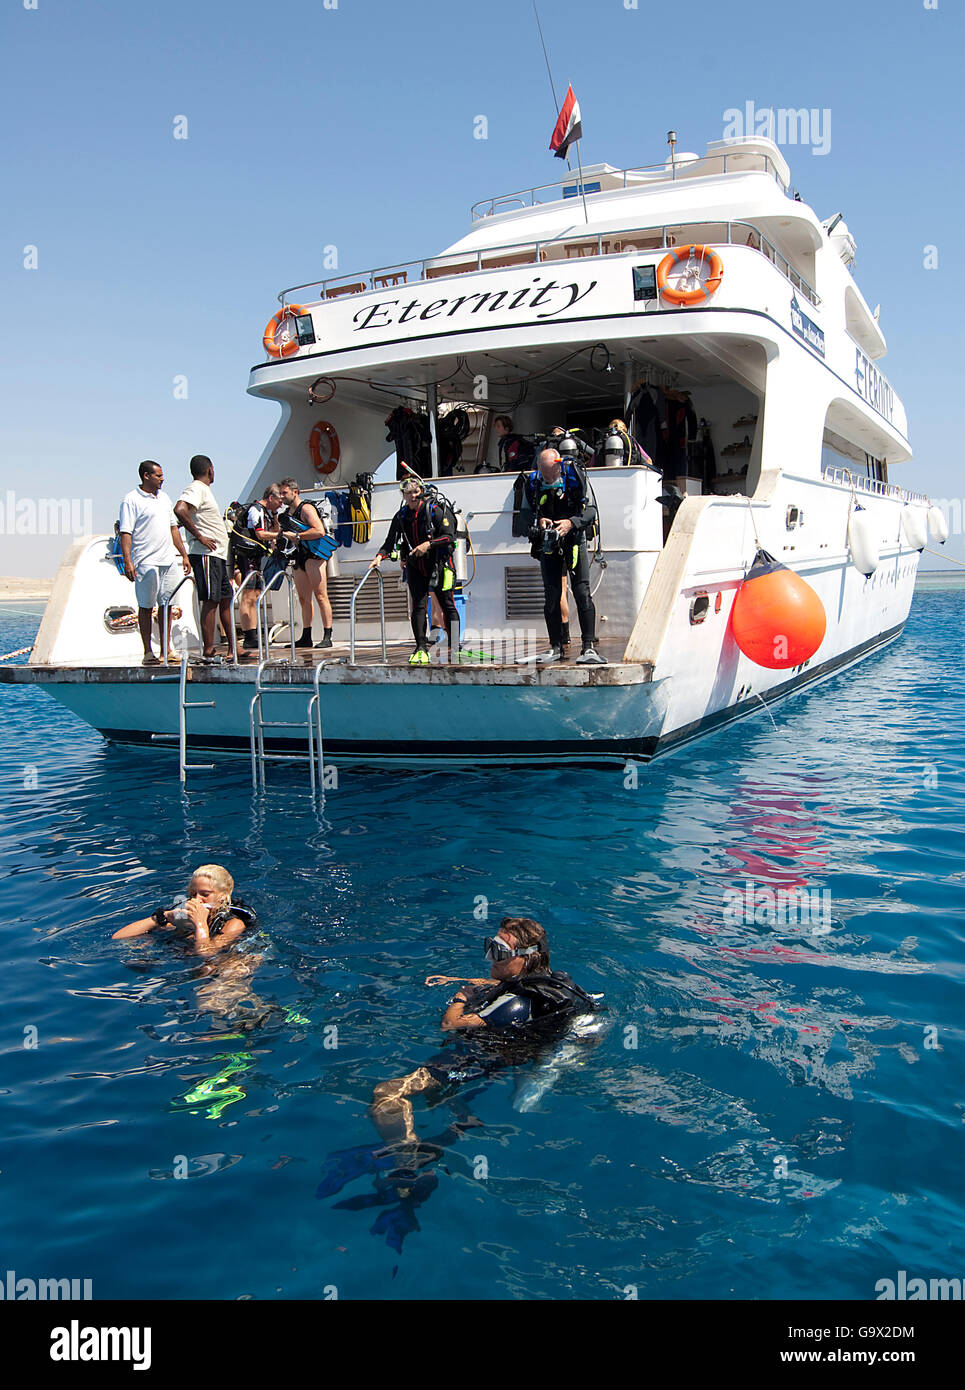 dive boat, diver couple in water, diving platform, scuba diver, Egypt, Africa, Red Sea Stock Photo